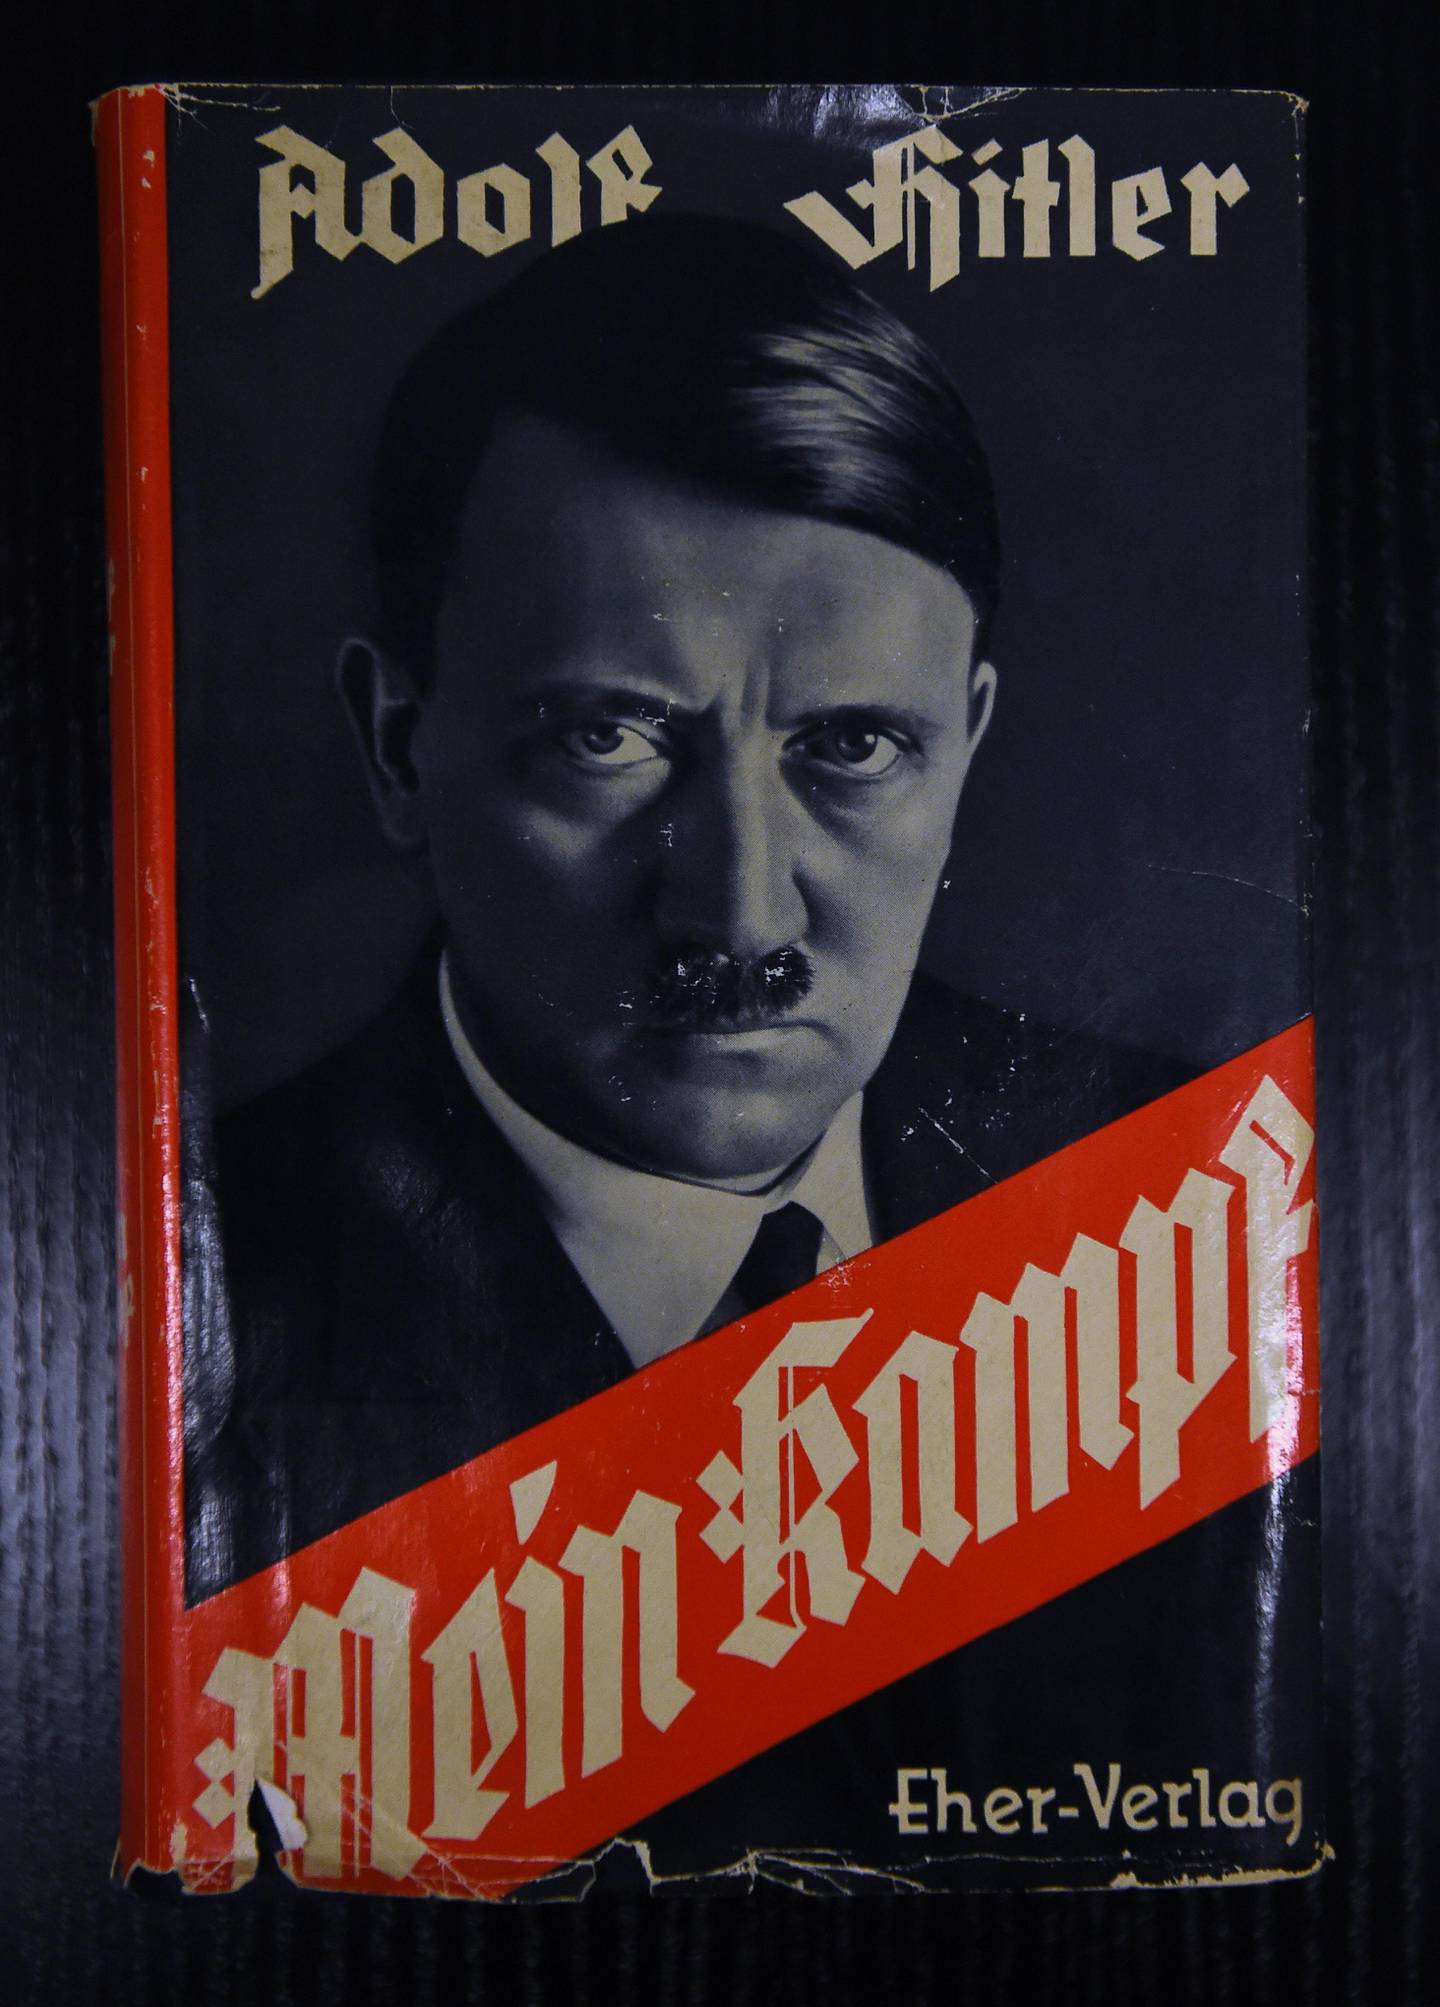 (FILES) This file photo taken on December 7, 2015 shows a German edition of Adolf Hitler's "Mein Kampf" (My Struggle) at the Berlin Central and Regional Library (Zentrale Landesbibliothek, ZLB) in Berlin 
German prosecutors said on May 26, 2016 they were investigating whether to bring charges against a publisher who has promised to print a version of Adolf Hitler's anti-Semitic manifesto "Mein Kampf" without annotations.  Re-publishing the original tract is illegal under German sedition laws against inciting racial hatred, although a version for historians with thousands of critical commentaries was allowed to go on sale this year.
 / AFP PHOTO / TOBIAS SCHWARZ